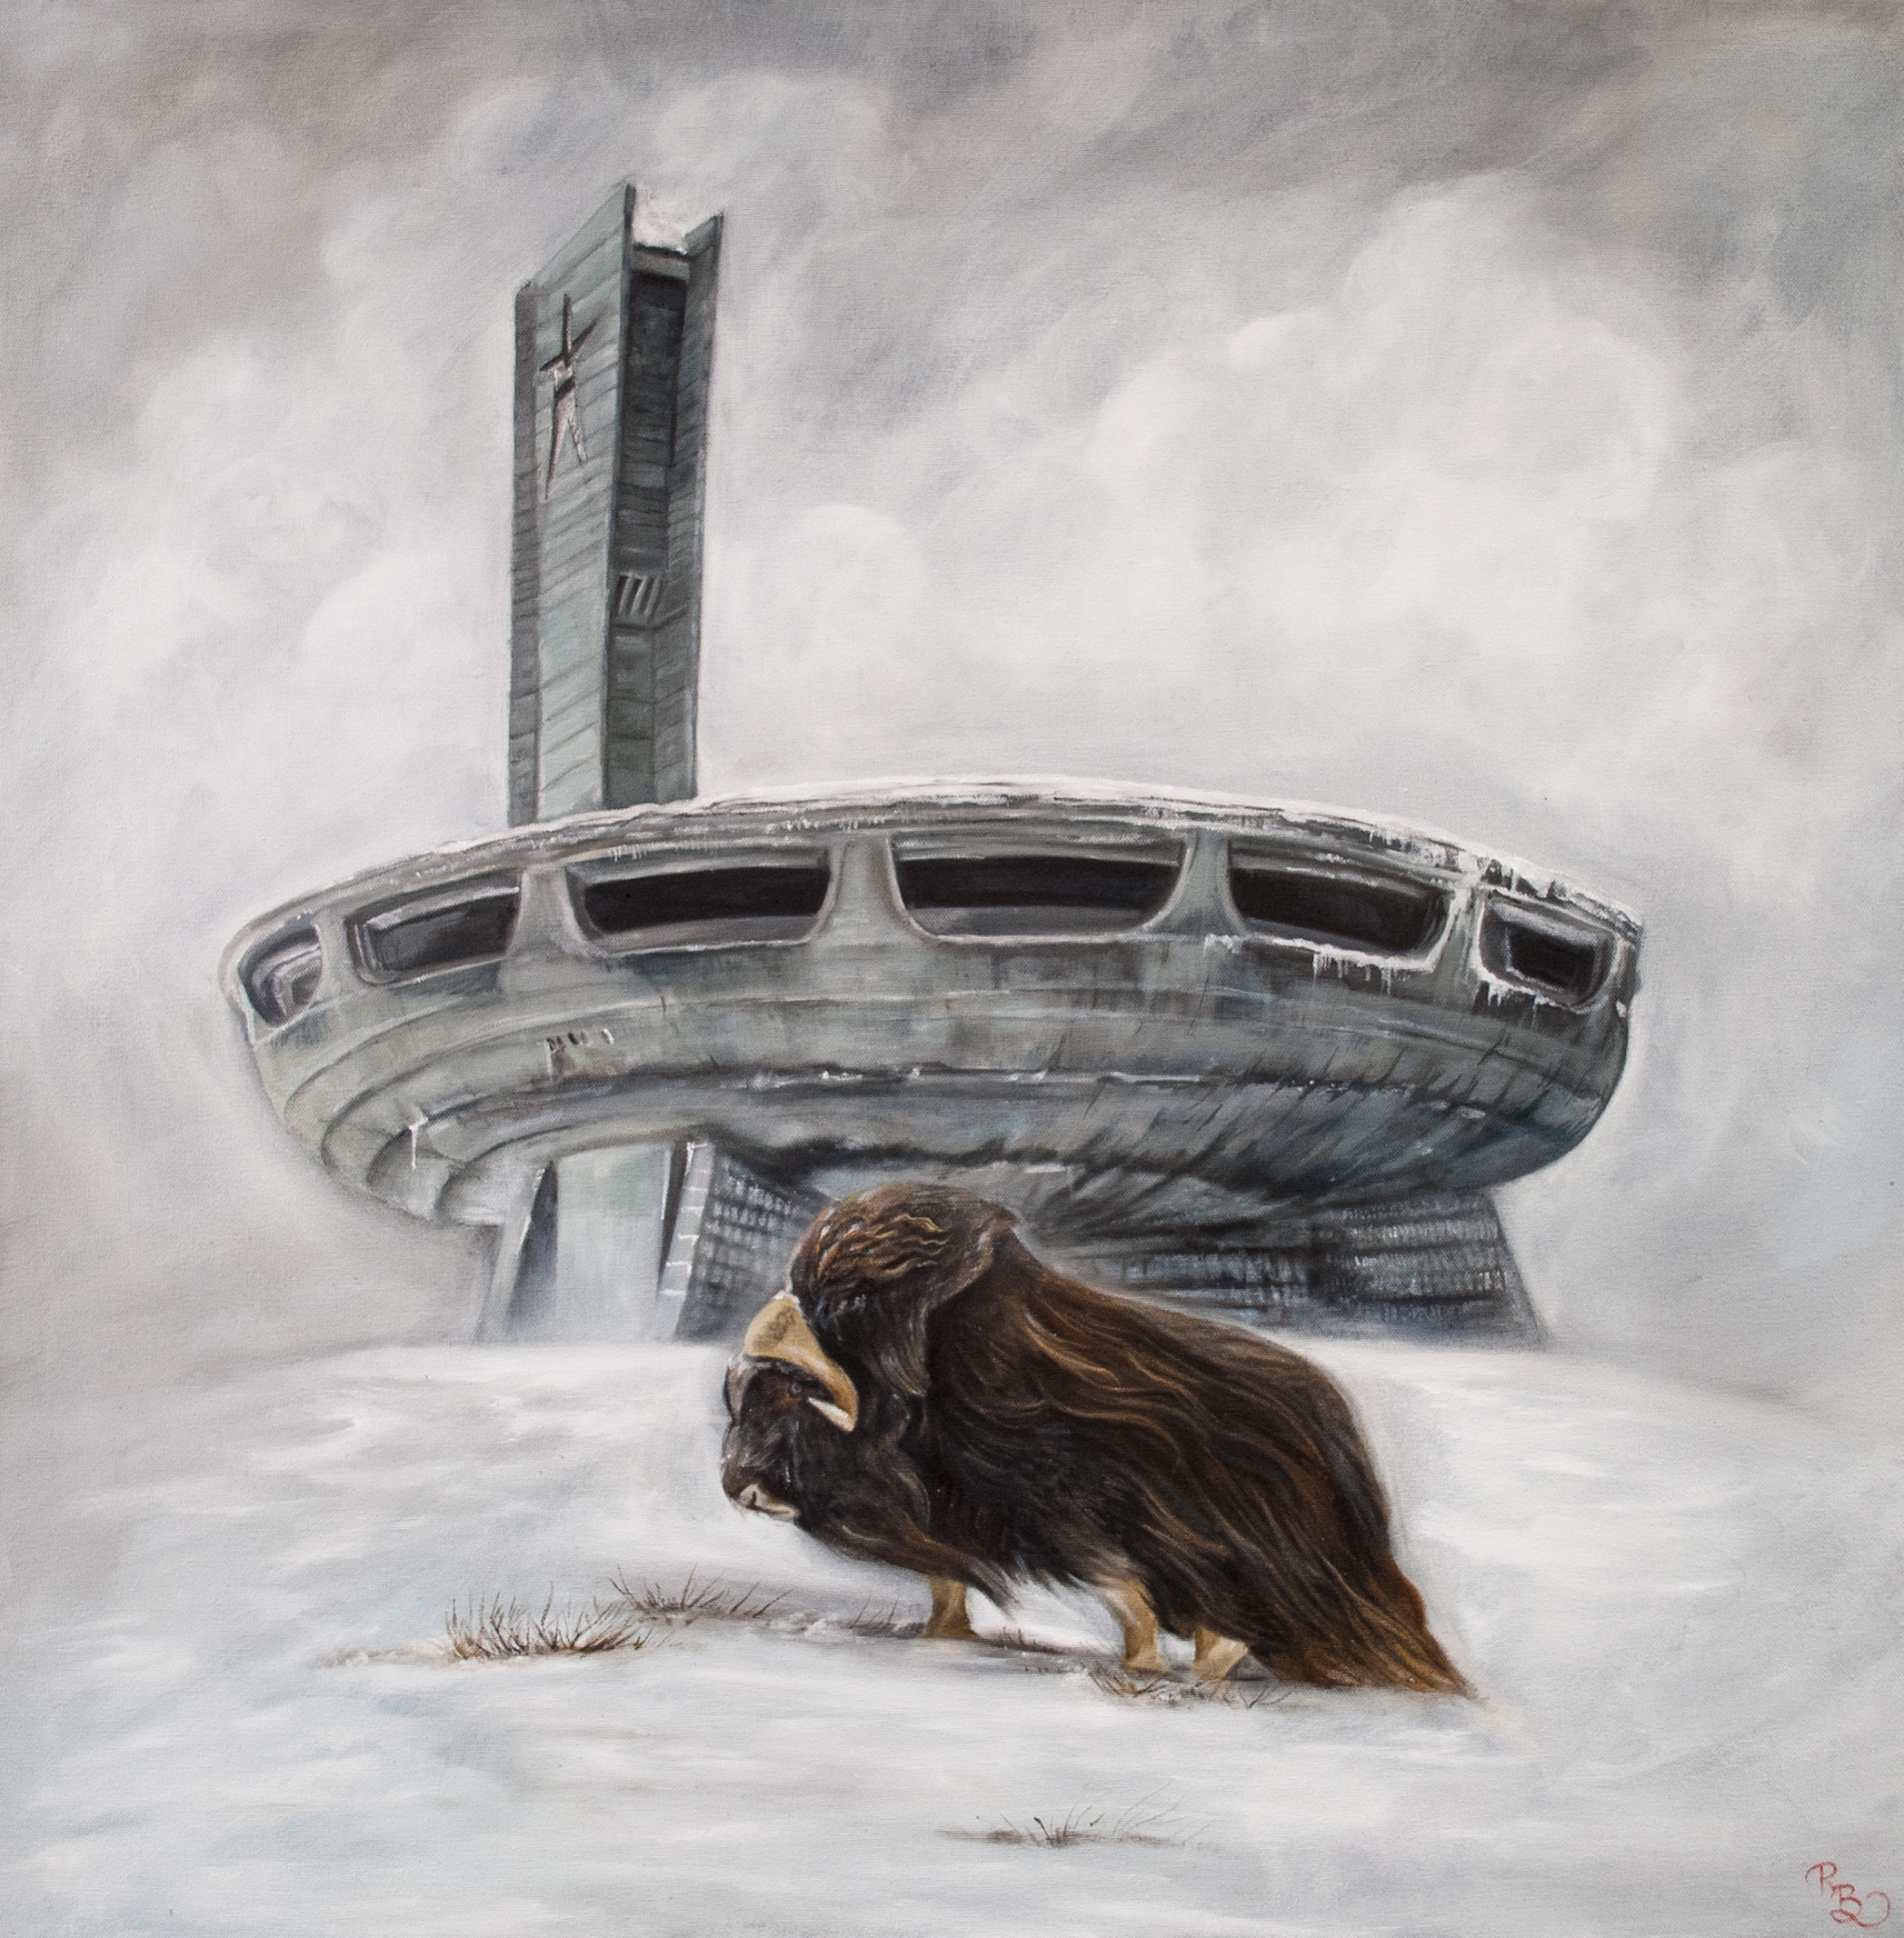 single musk ox in the middle of a blizzard with a Soviet Union military base in the background